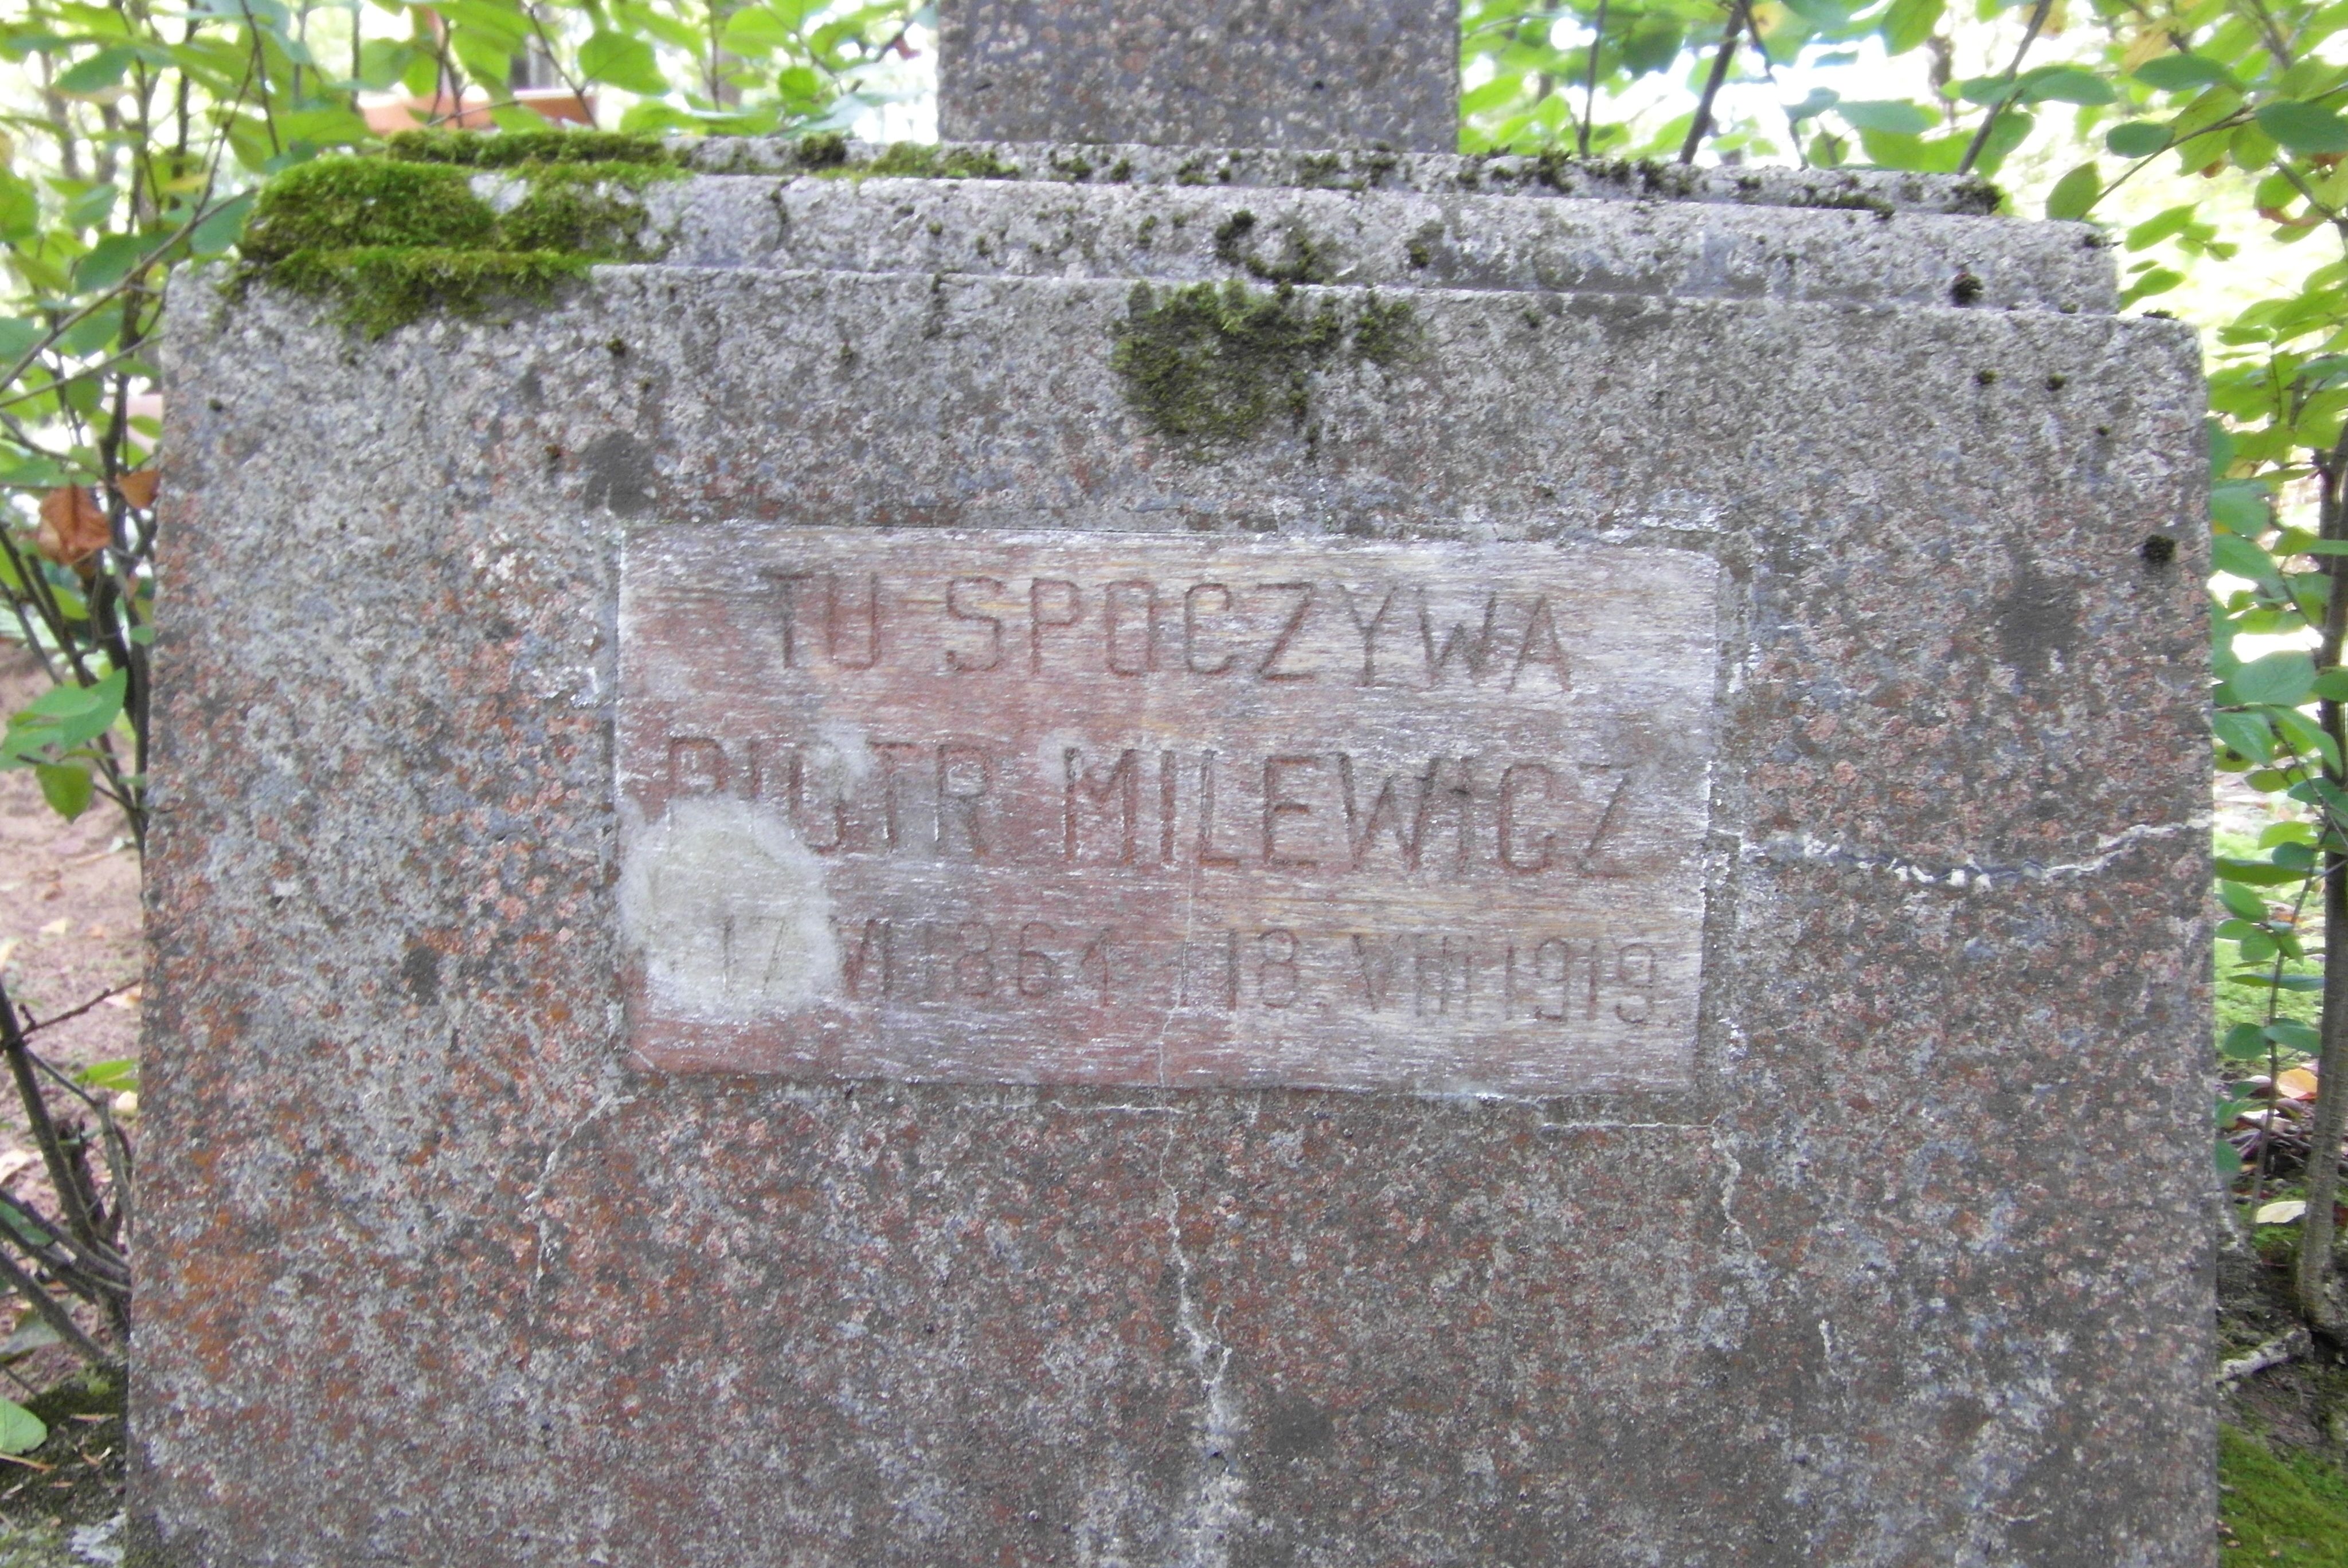 Inscription from the gravestone of Peter Milevich, St Michael's cemetery in Riga, as of 2021.